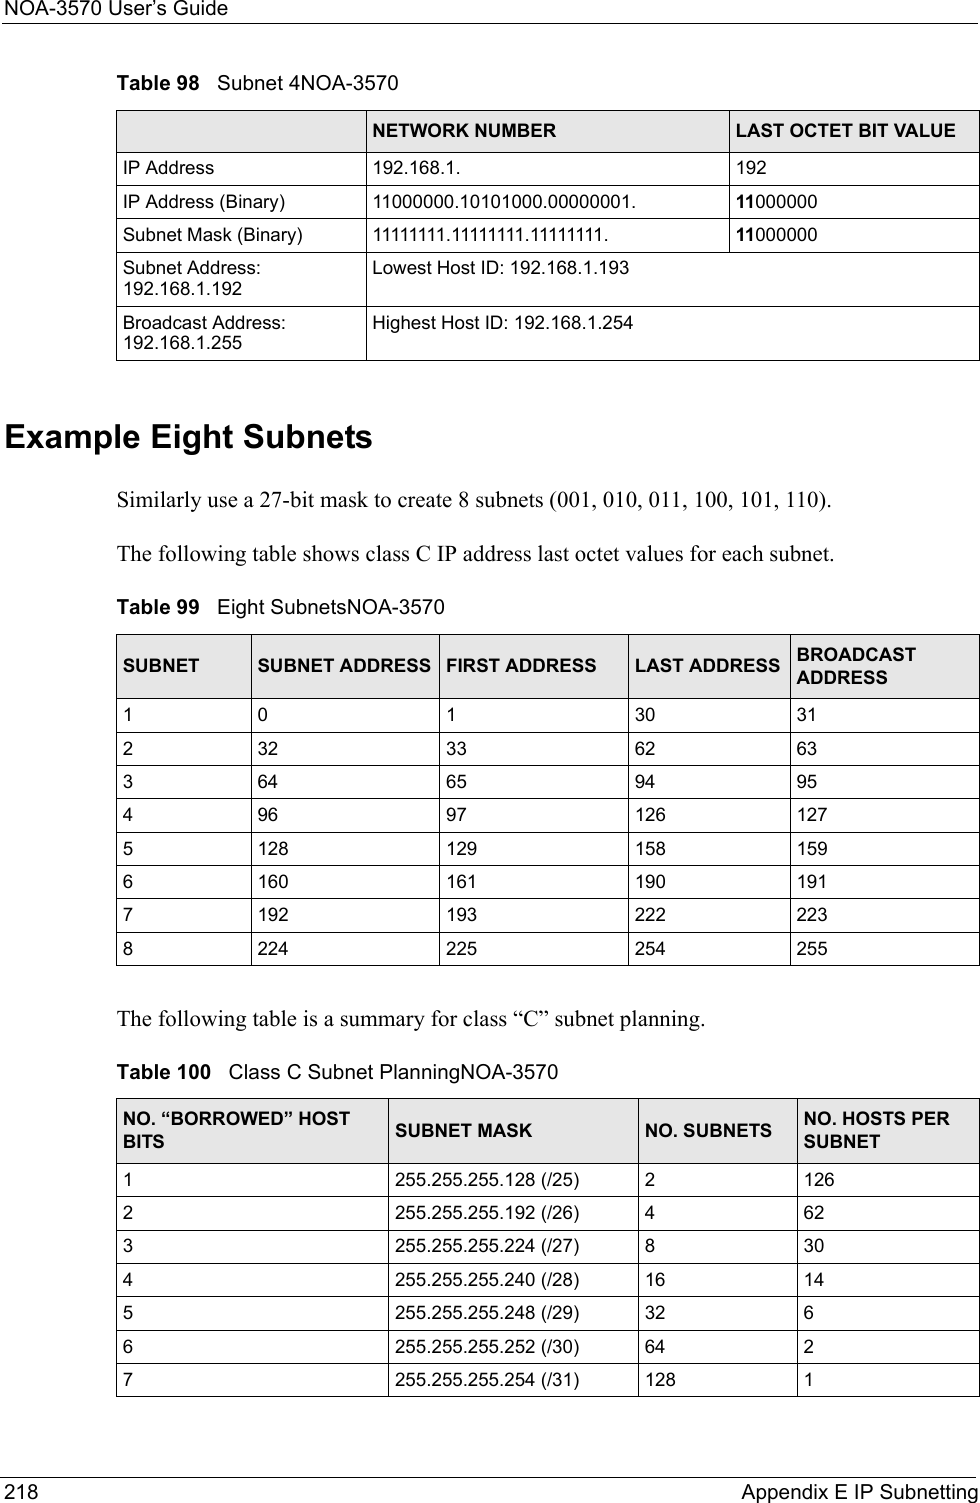 NOA-3570 User’s Guide218 Appendix E IP SubnettingExample Eight SubnetsSimilarly use a 27-bit mask to create 8 subnets (001, 010, 011, 100, 101, 110). The following table shows class C IP address last octet values for each subnet.The following table is a summary for class “C” subnet planning.Table 98   Subnet 4NOA-3570NETWORK NUMBER LAST OCTET BIT VALUEIP Address 192.168.1. 192IP Address (Binary) 11000000.10101000.00000001. 11000000Subnet Mask (Binary) 11111111.11111111.11111111. 11000000Subnet Address: 192.168.1.192Lowest Host ID: 192.168.1.193Broadcast Address: 192.168.1.255Highest Host ID: 192.168.1.254Table 99   Eight SubnetsNOA-3570SUBNET SUBNET ADDRESS FIRST ADDRESS LAST ADDRESS BROADCAST ADDRESS1 0 1 30 31232 33 62 63364 65 94 95496 97 126 1275128 129 158 1596160 161 190 1917192 193 222 2238224 225 254 255Table 100   Class C Subnet PlanningNOA-3570NO. “BORROWED” HOST BITS SUBNET MASK NO. SUBNETS NO. HOSTS PER SUBNET1255.255.255.128 (/25) 21262255.255.255.192 (/26) 4623255.255.255.224 (/27) 8304255.255.255.240 (/28) 16 145255.255.255.248 (/29) 32 66255.255.255.252 (/30) 64 27255.255.255.254 (/31) 128 1